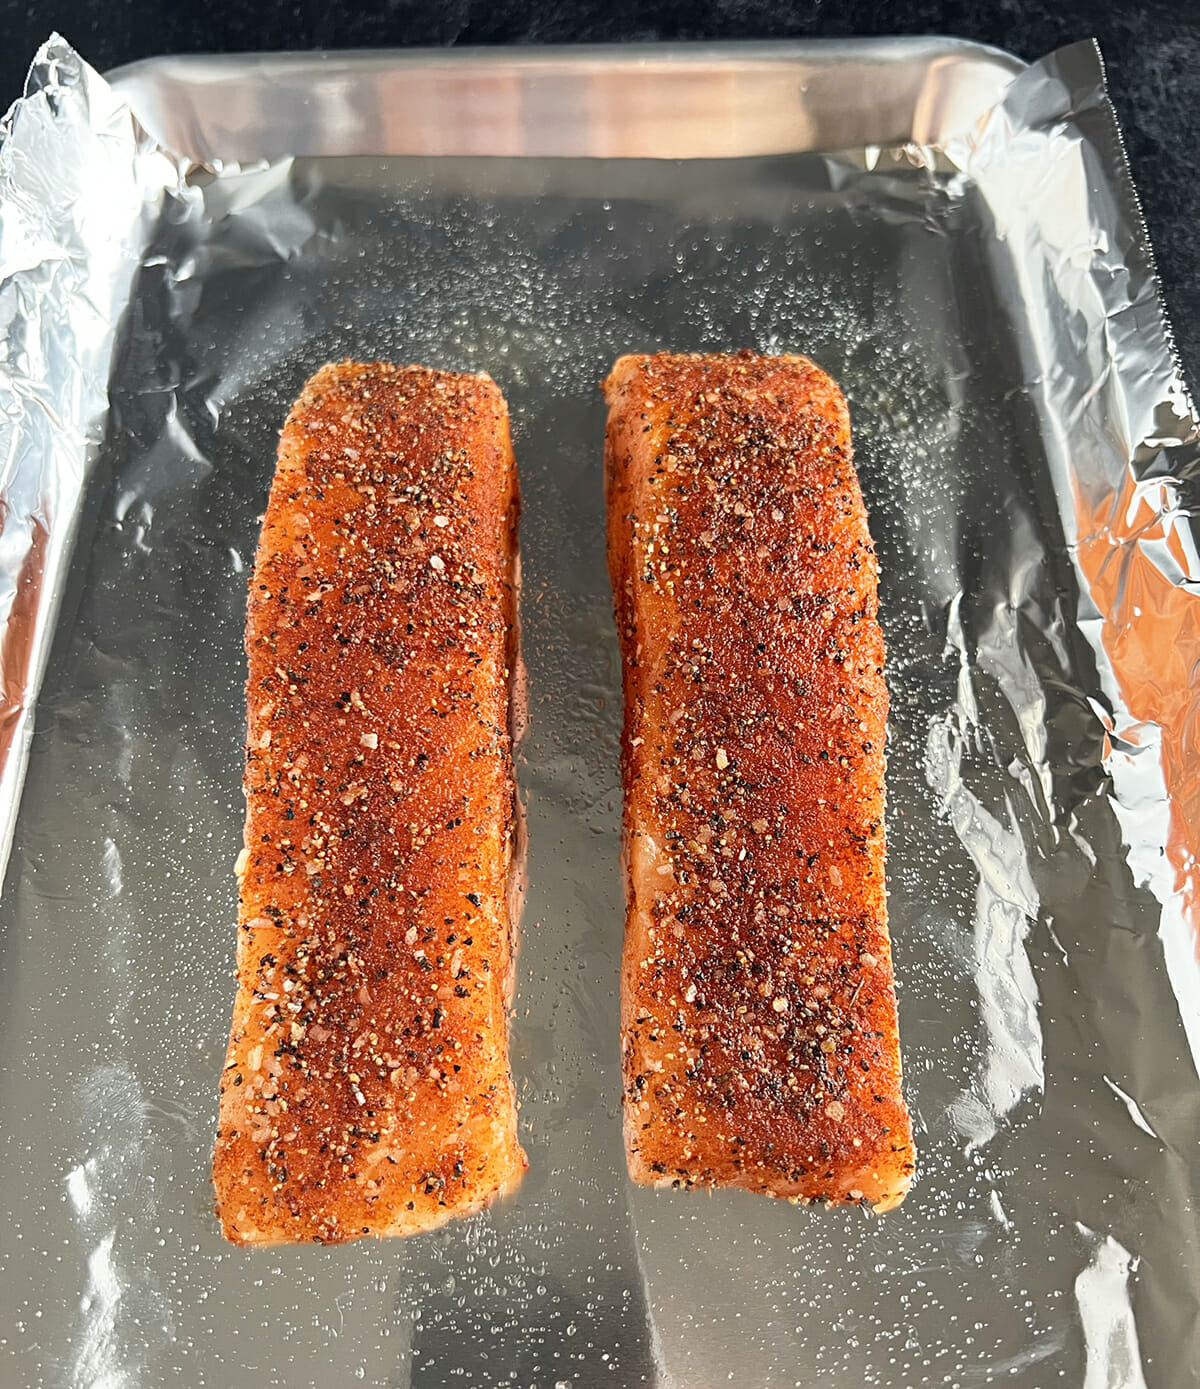 Seasoned salmon filets ready to go in the oven.